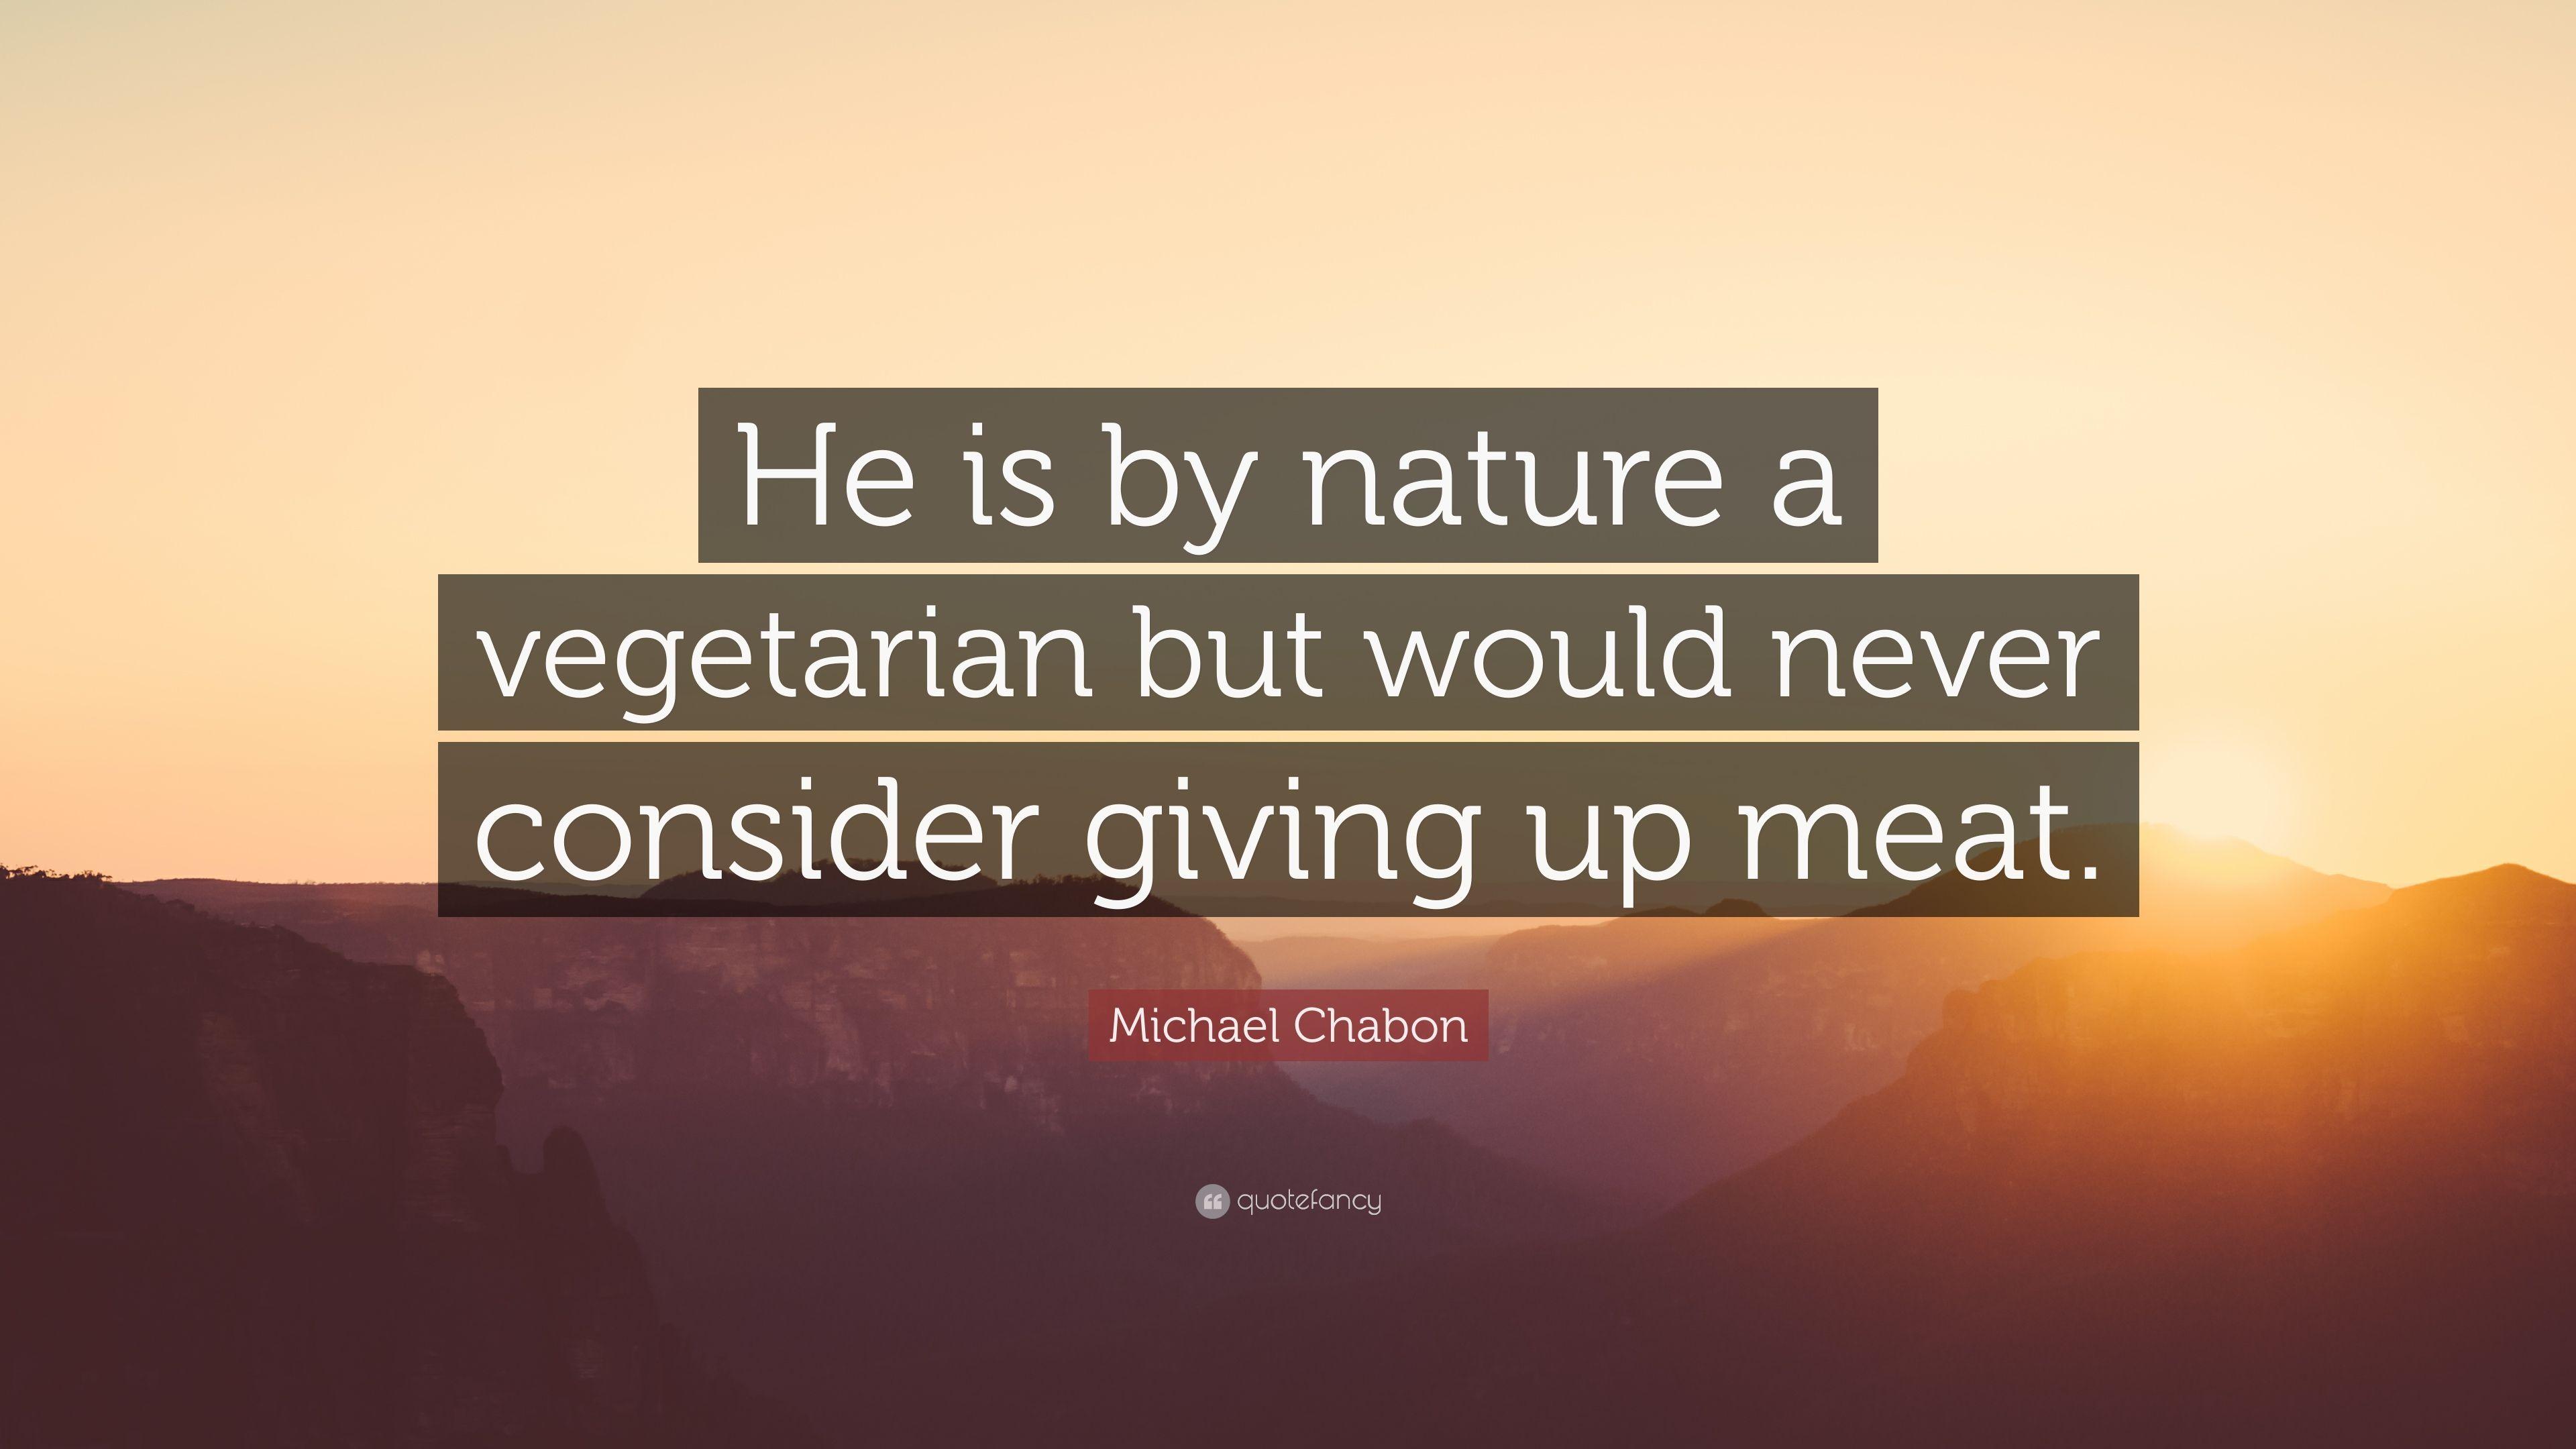 Michael Chabon Quote: “He is by nature a vegetarian but would never